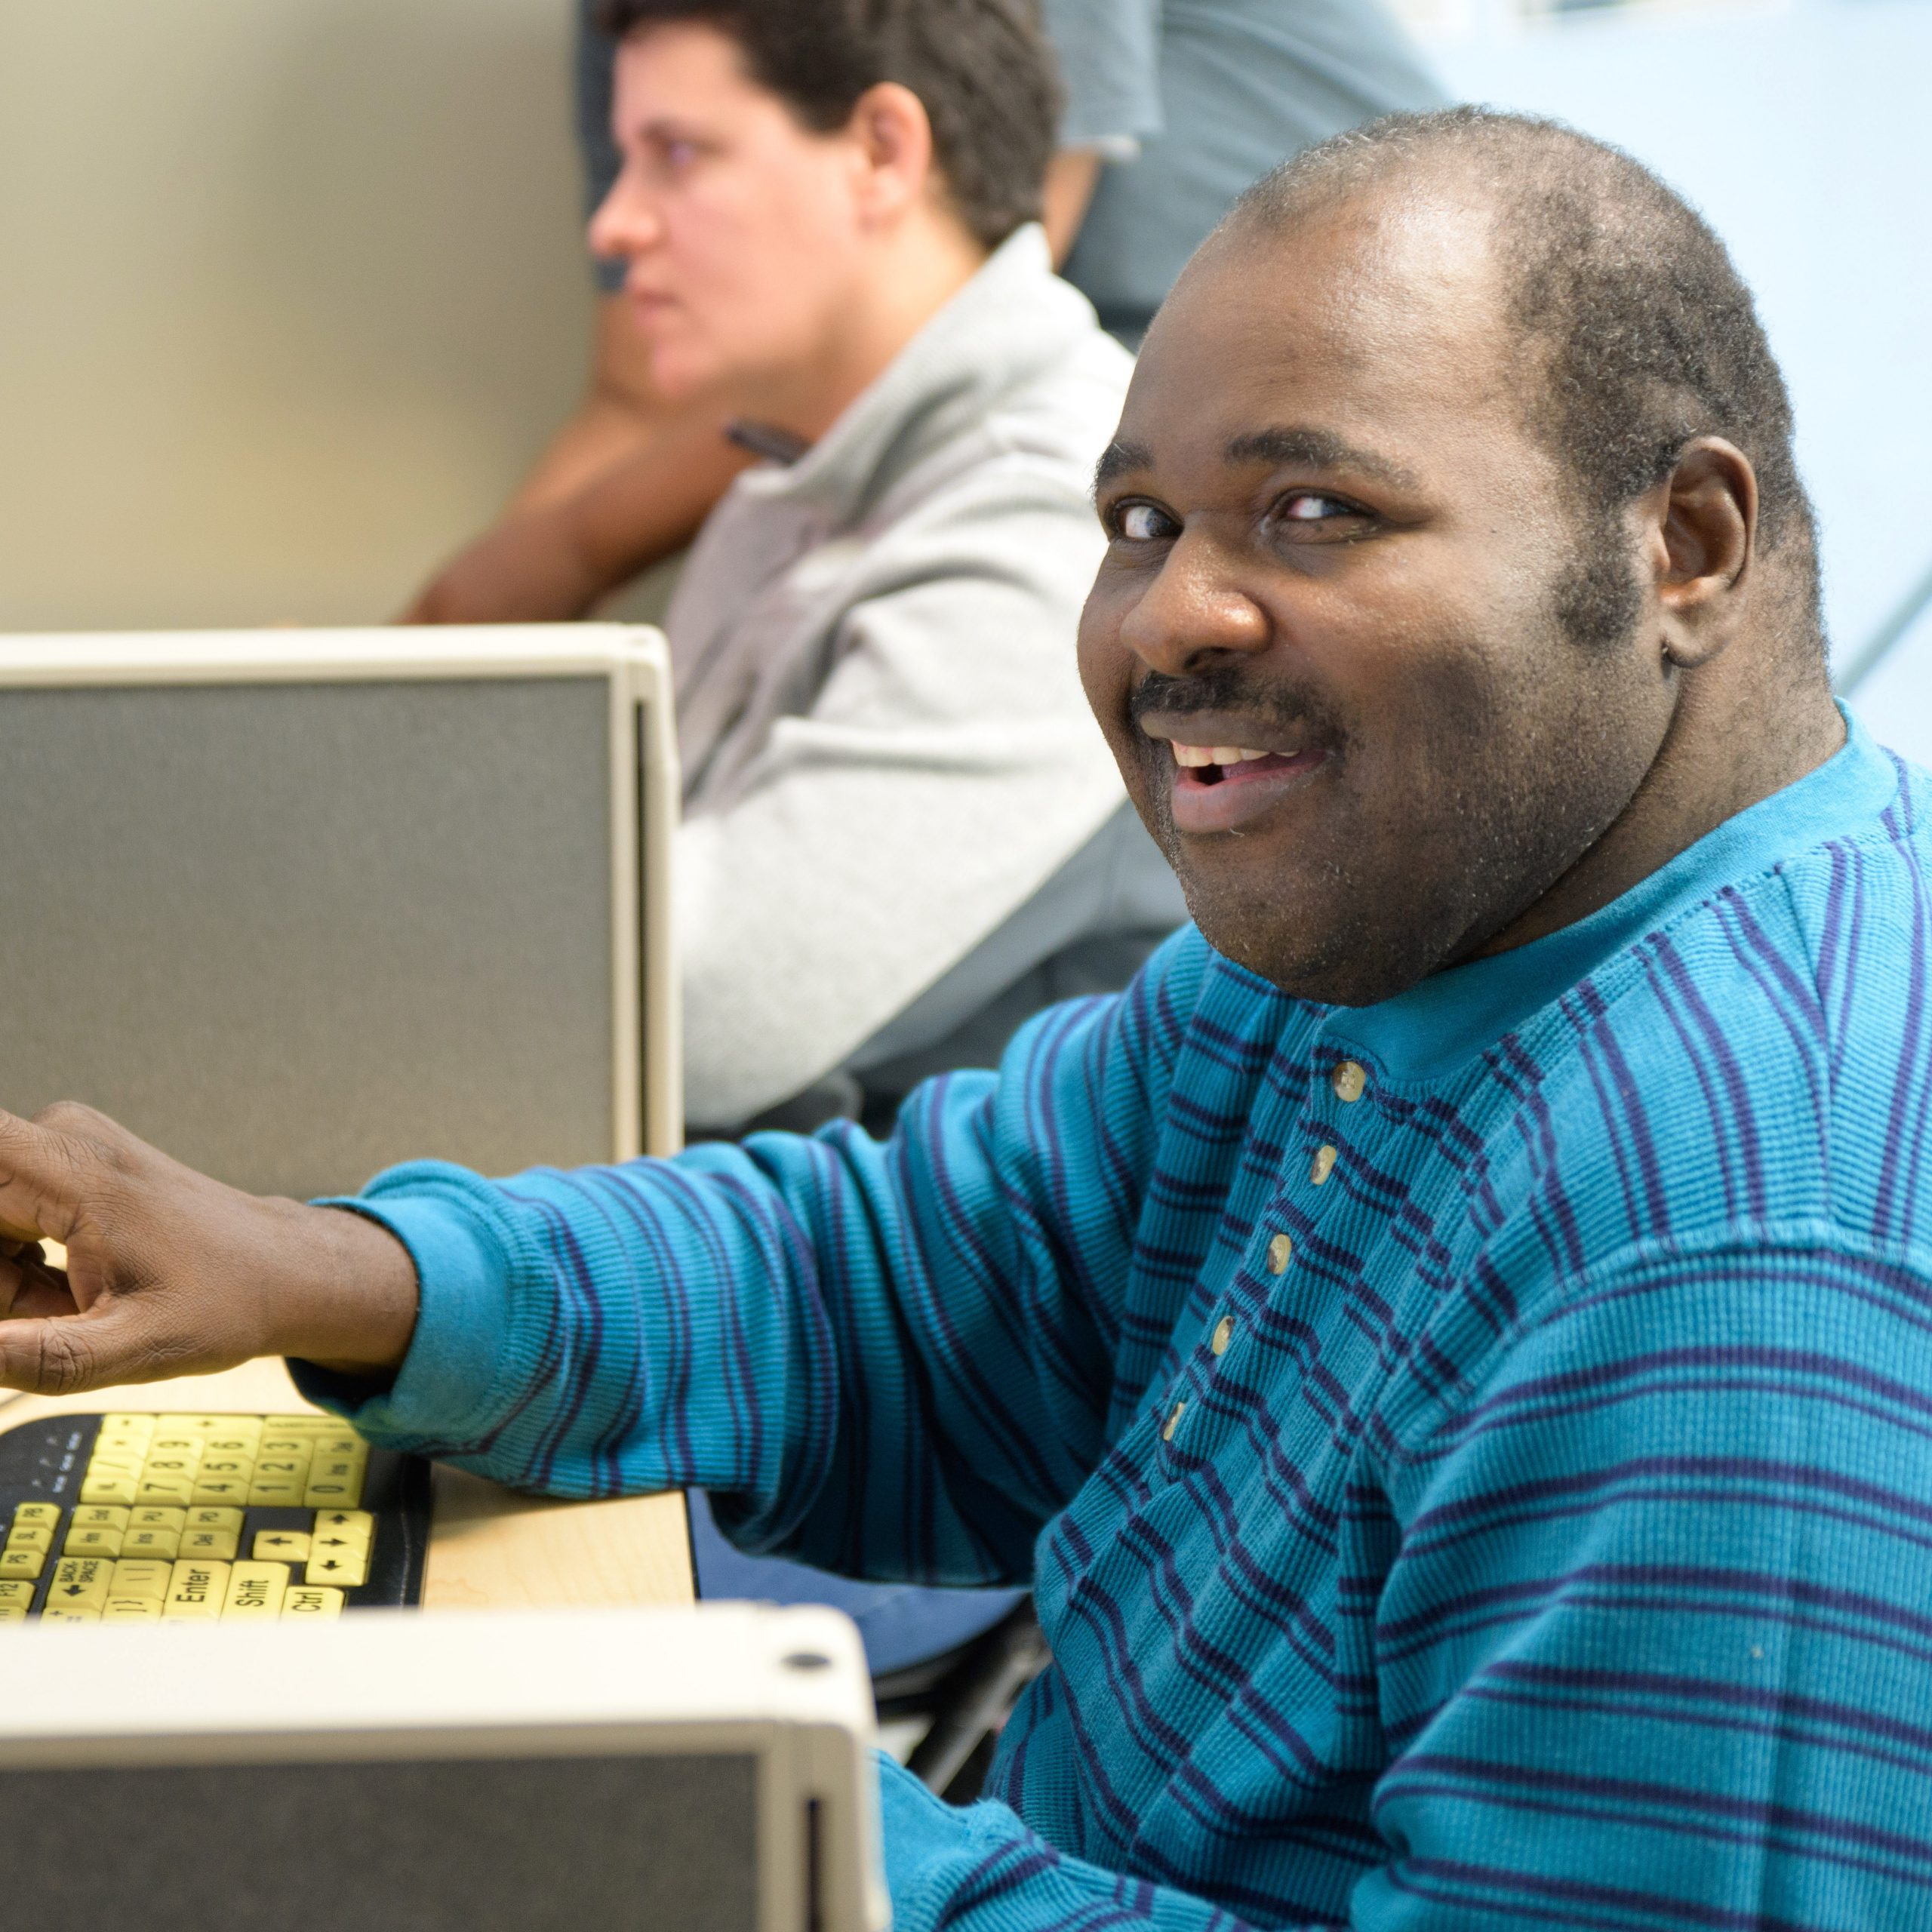 Adult male smiling at computer